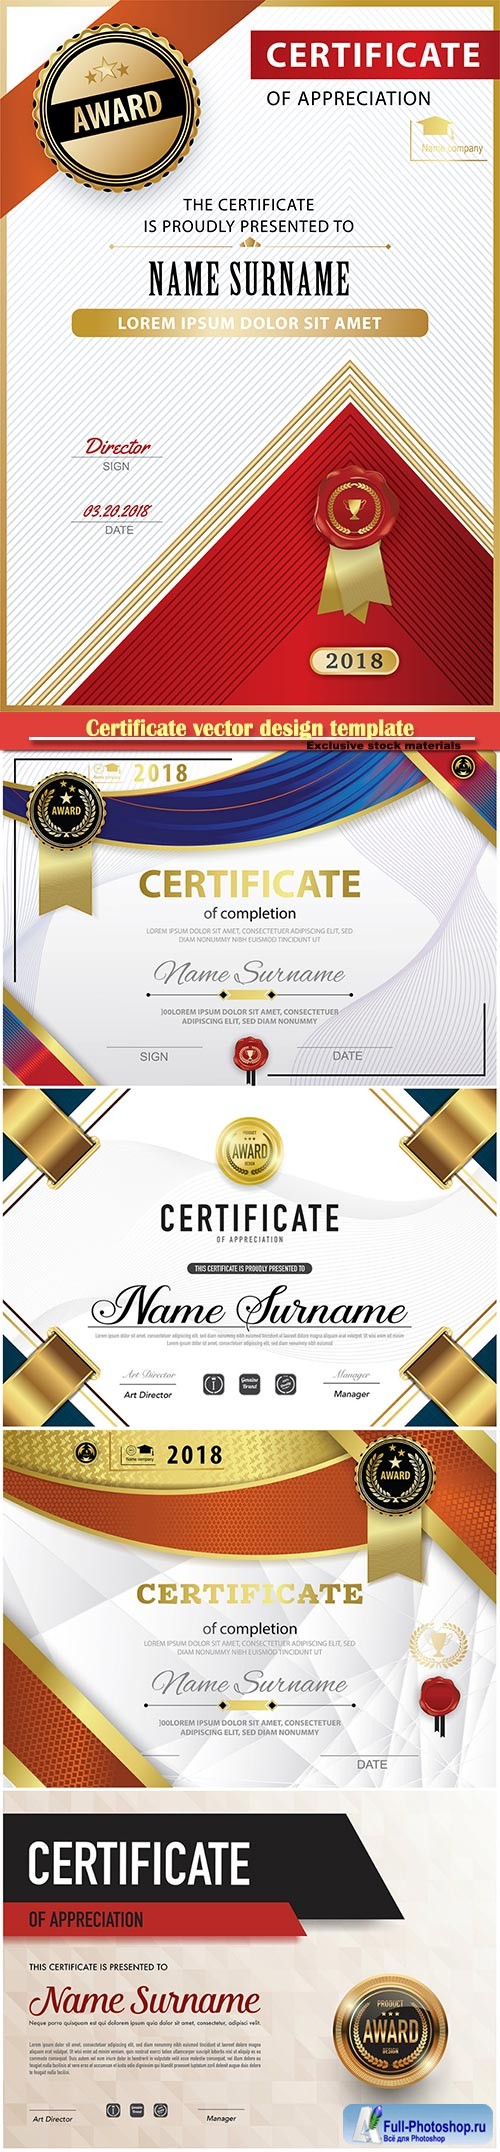 Certificate and vector diploma design template # 74